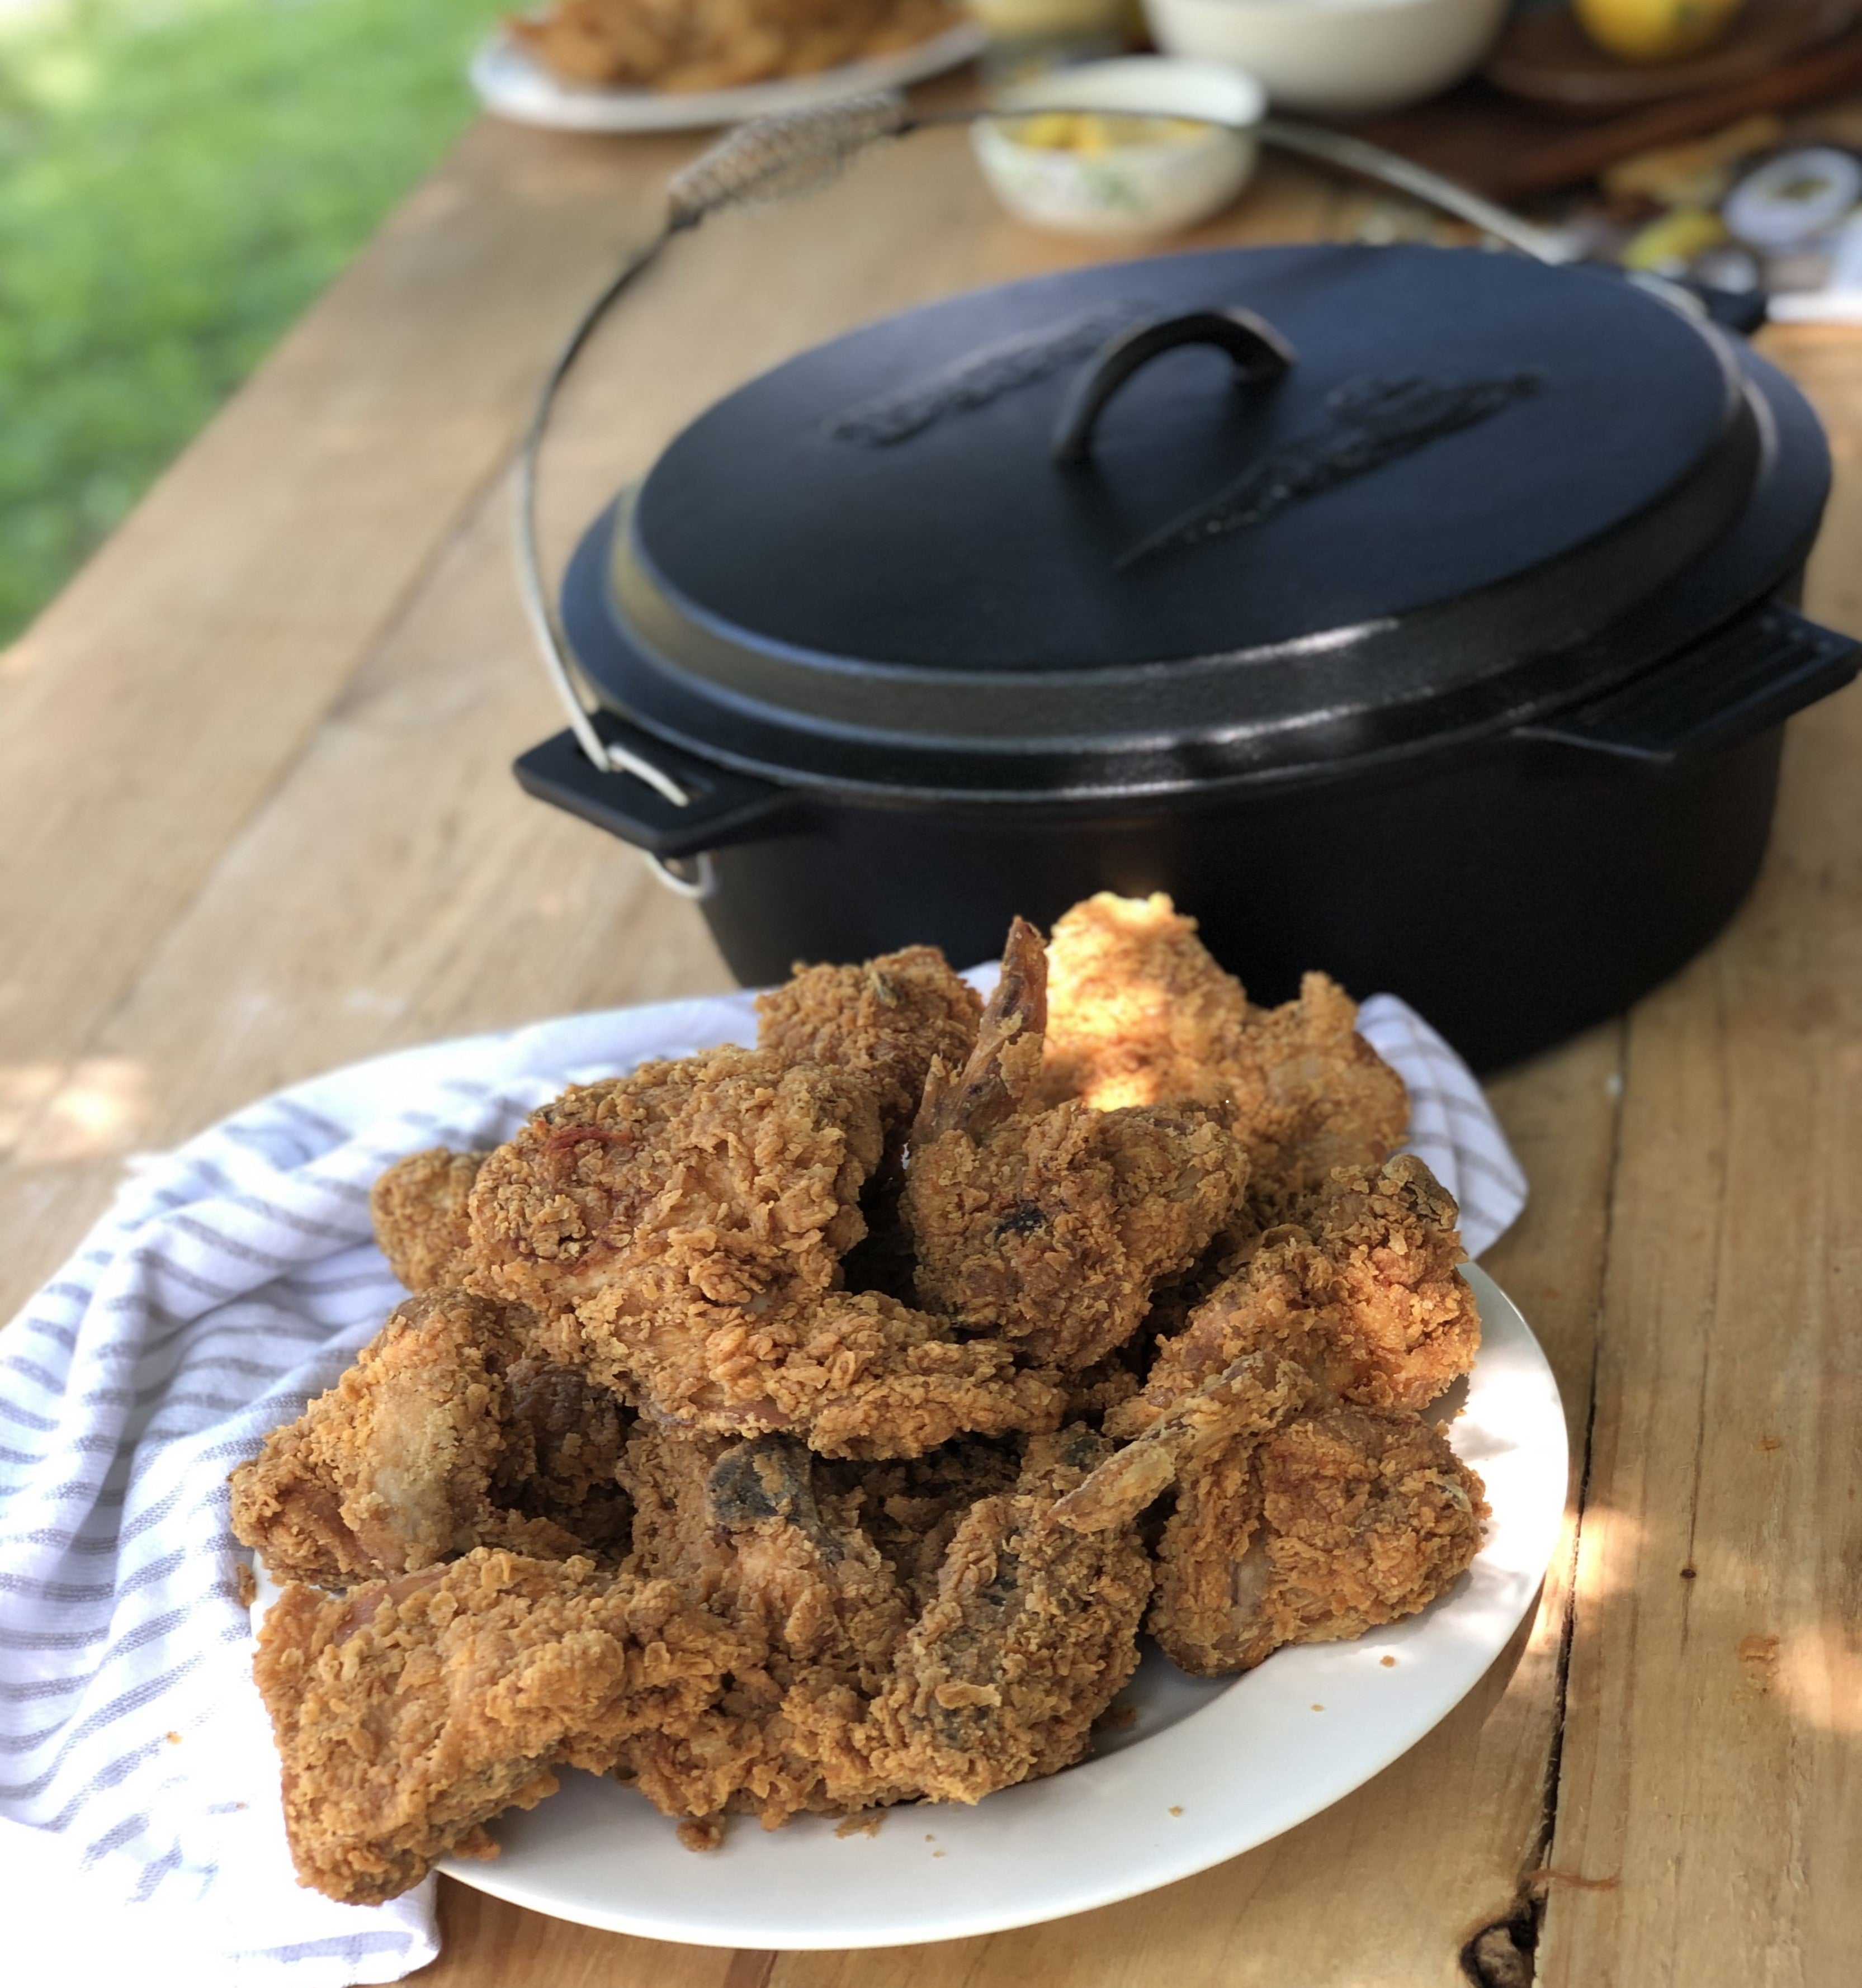 Bayou Classic 10 Quart Cast Iron Chicken Fryer with Lid